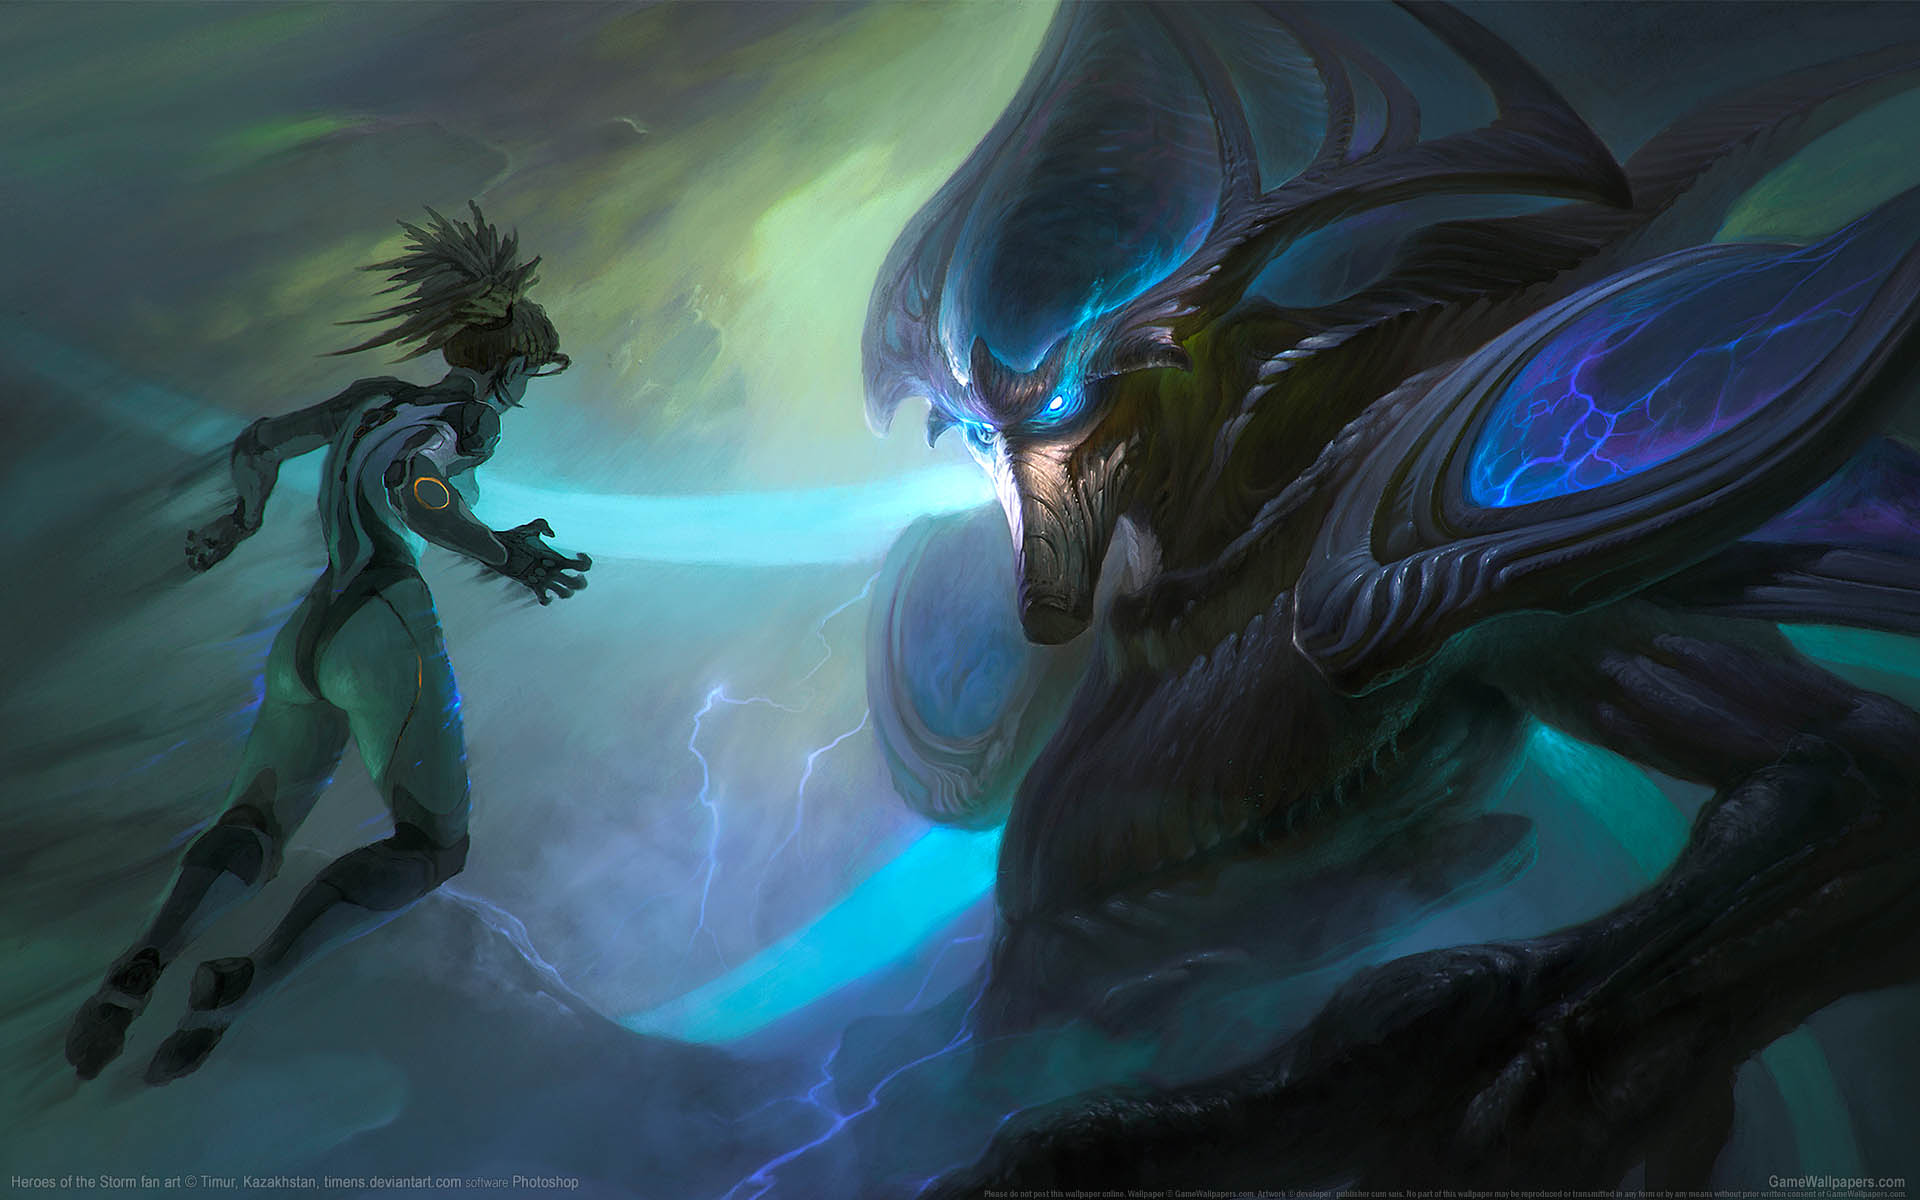 Heroes of the Storm fan art achtergrond 09 1920x1200